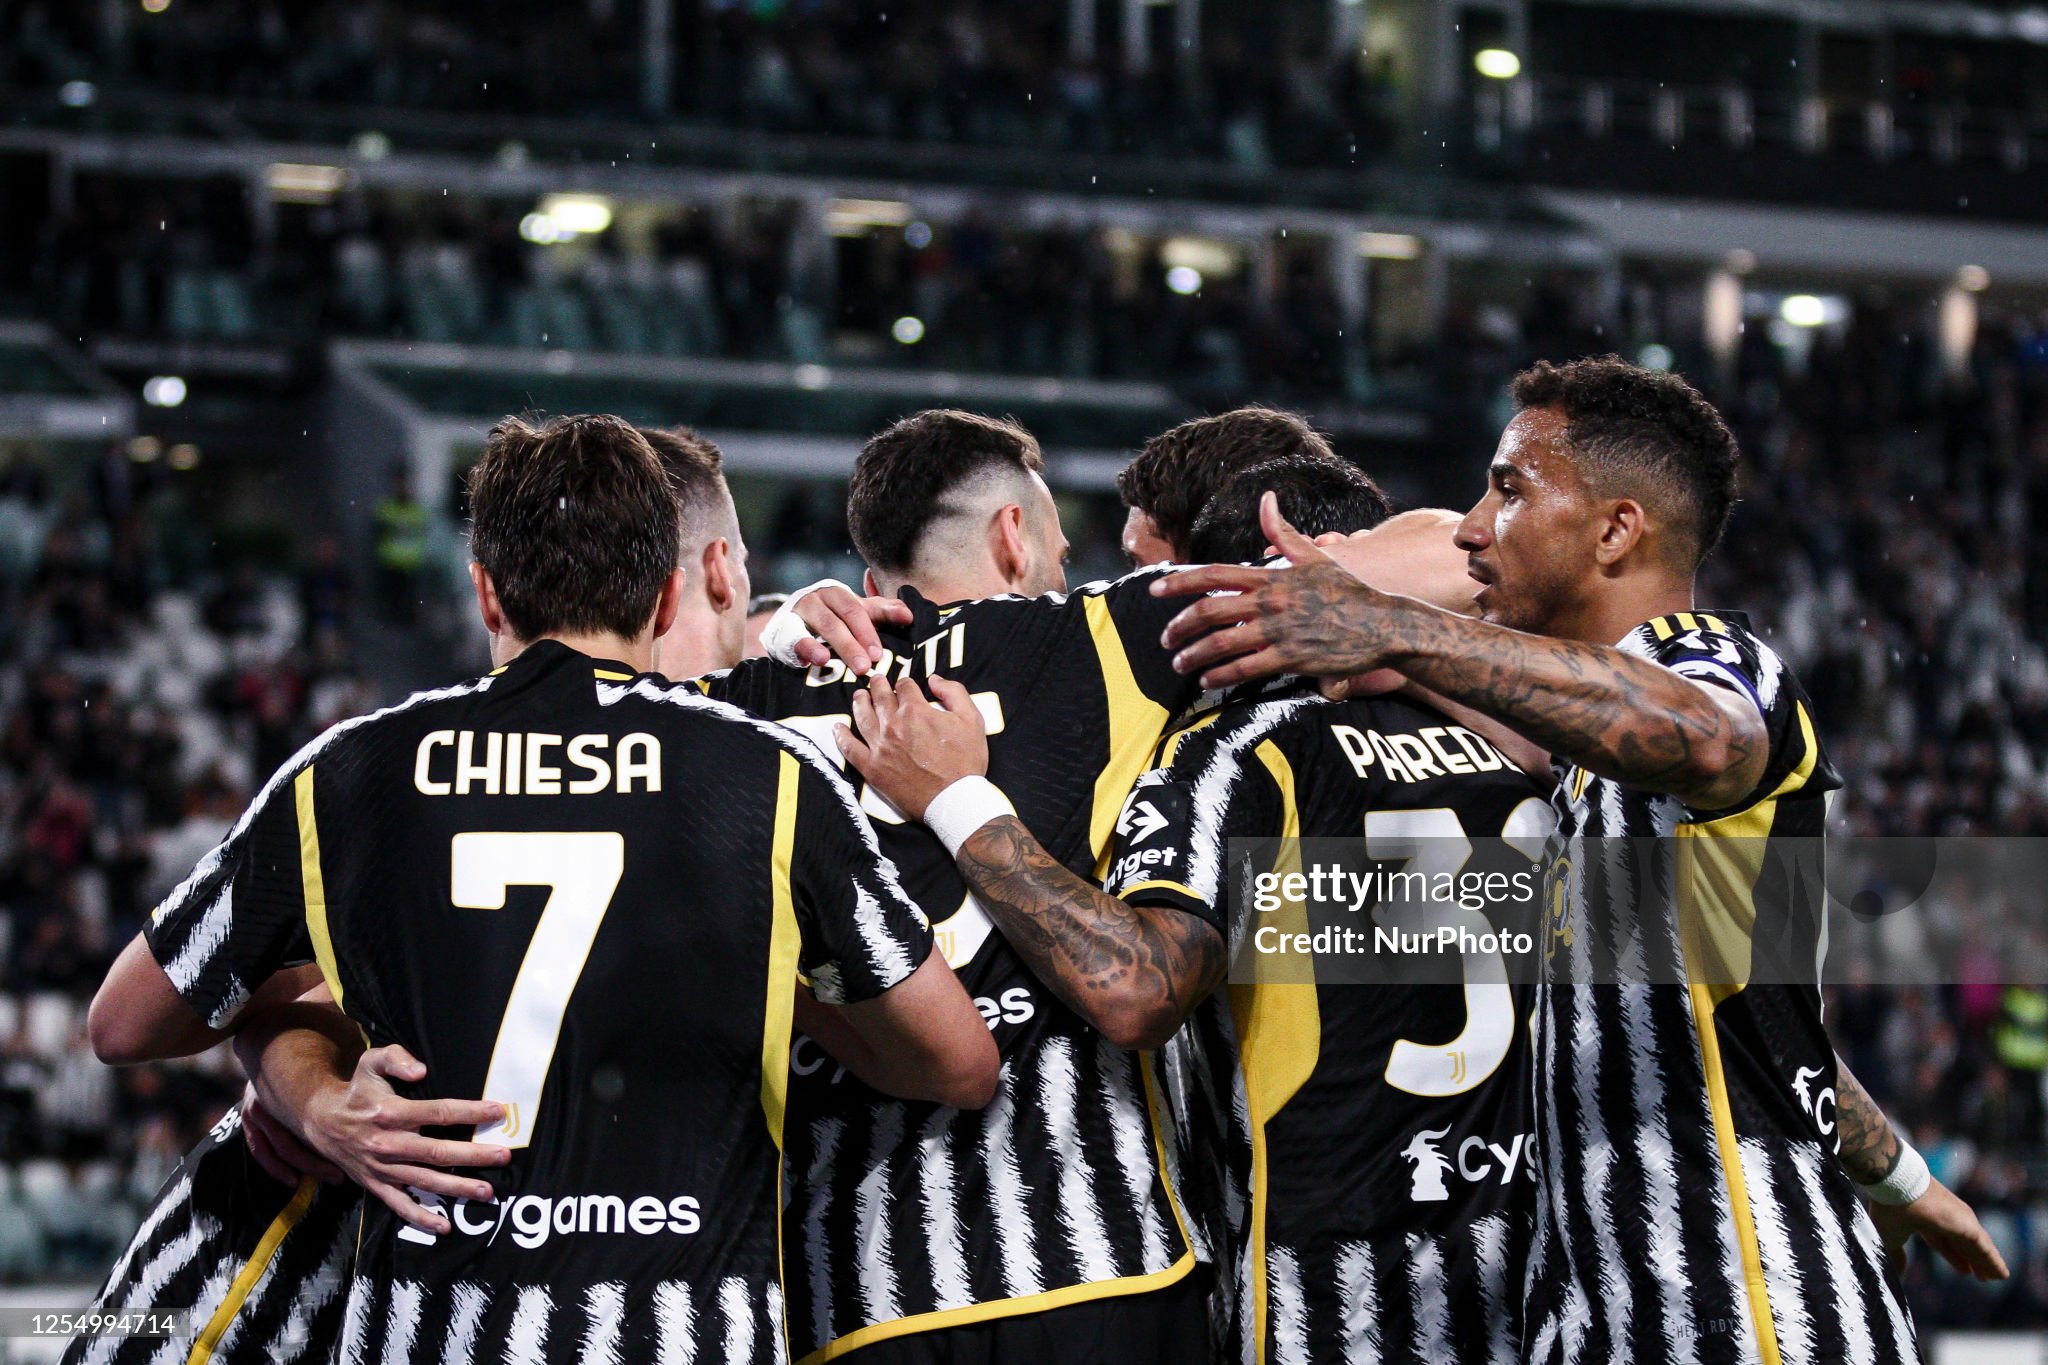 Juventus solidified their hold on second place in Serie A with a win over Cremonese